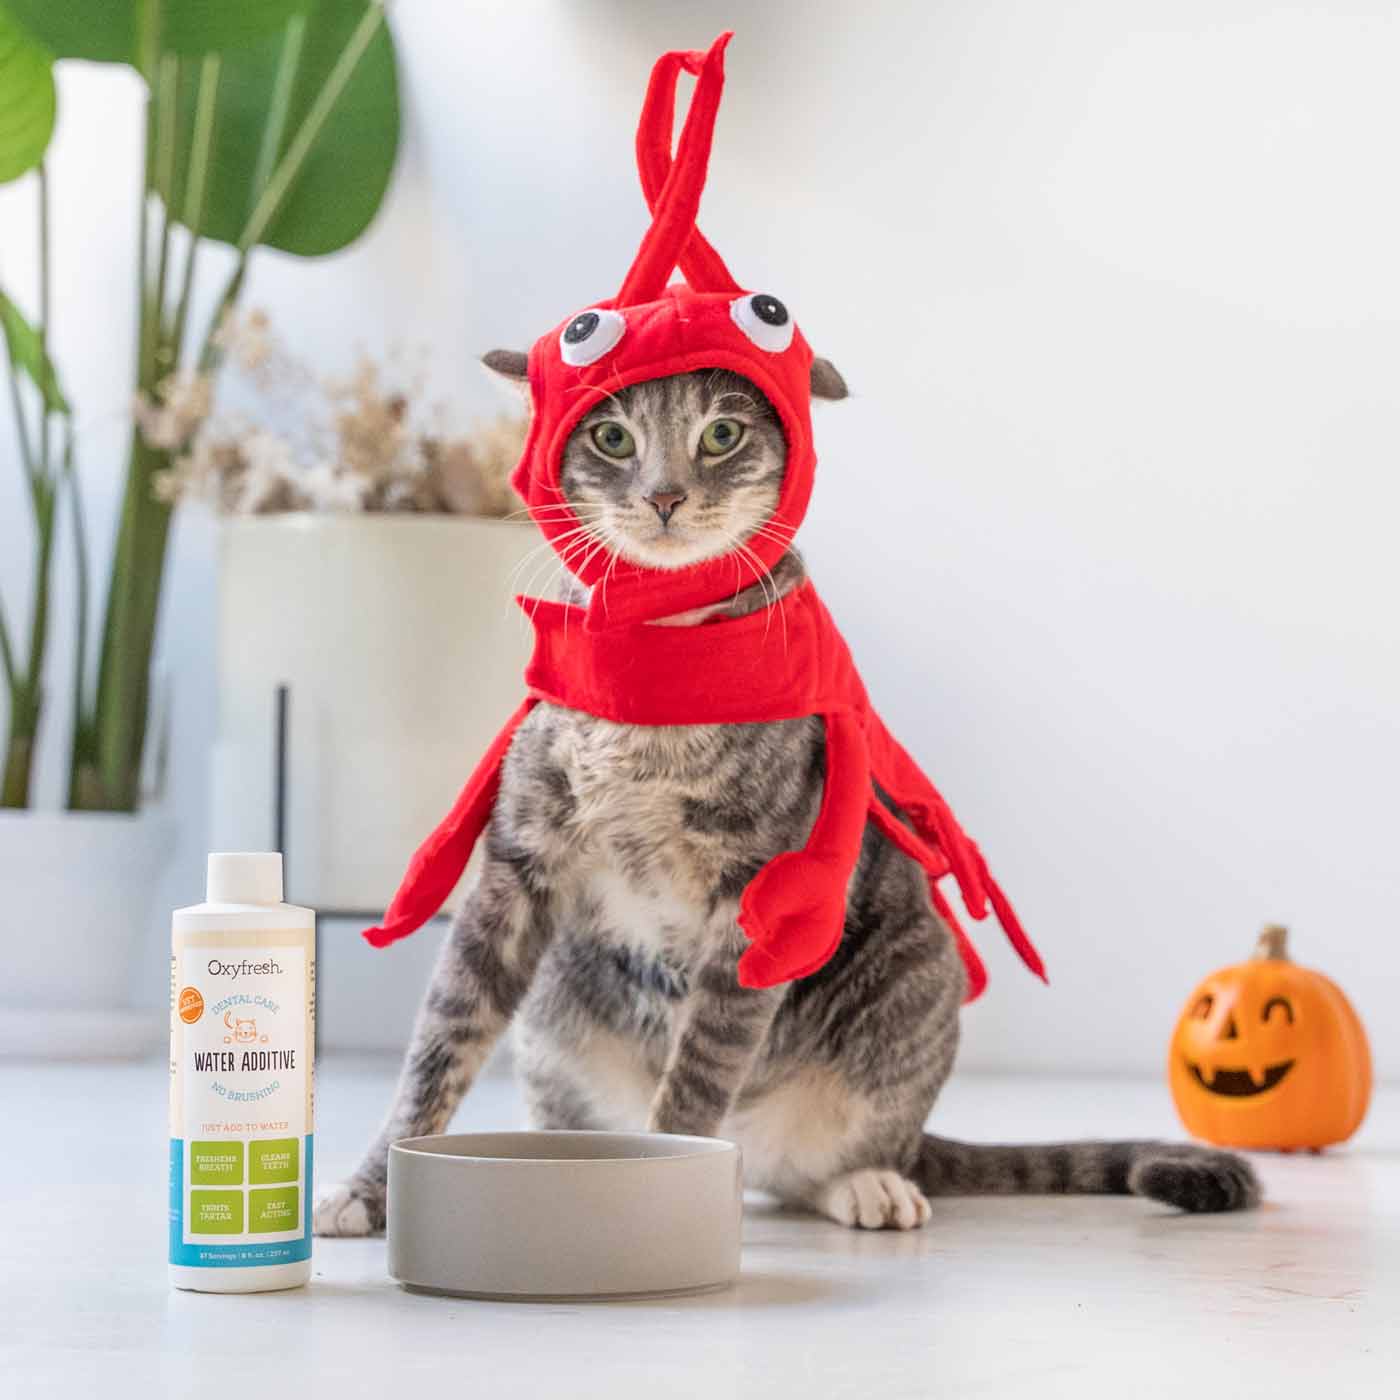 oxyfresh cat water additive with kitty who is wearing a lobster costume